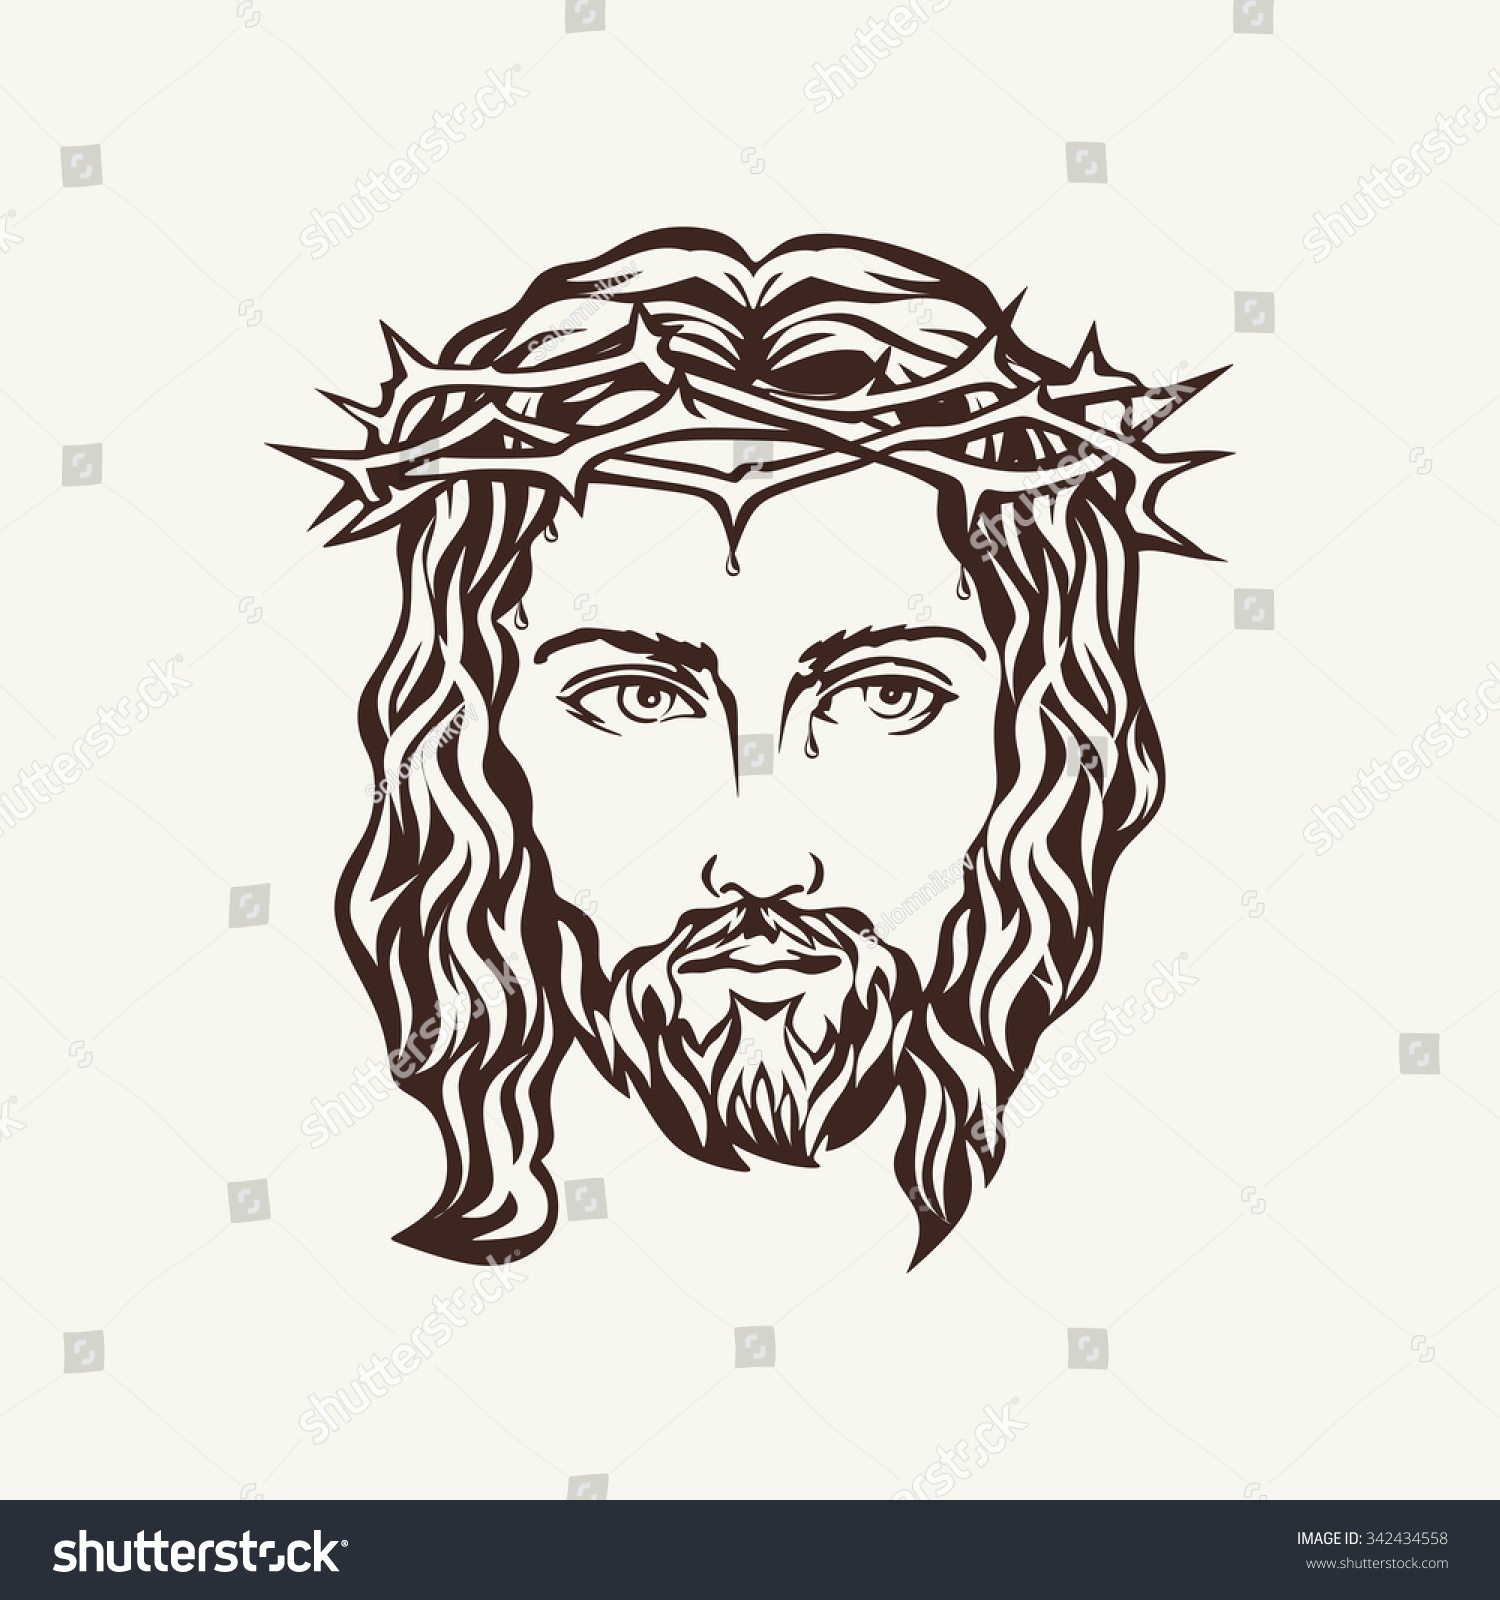 clipart of jesus face - photo #35